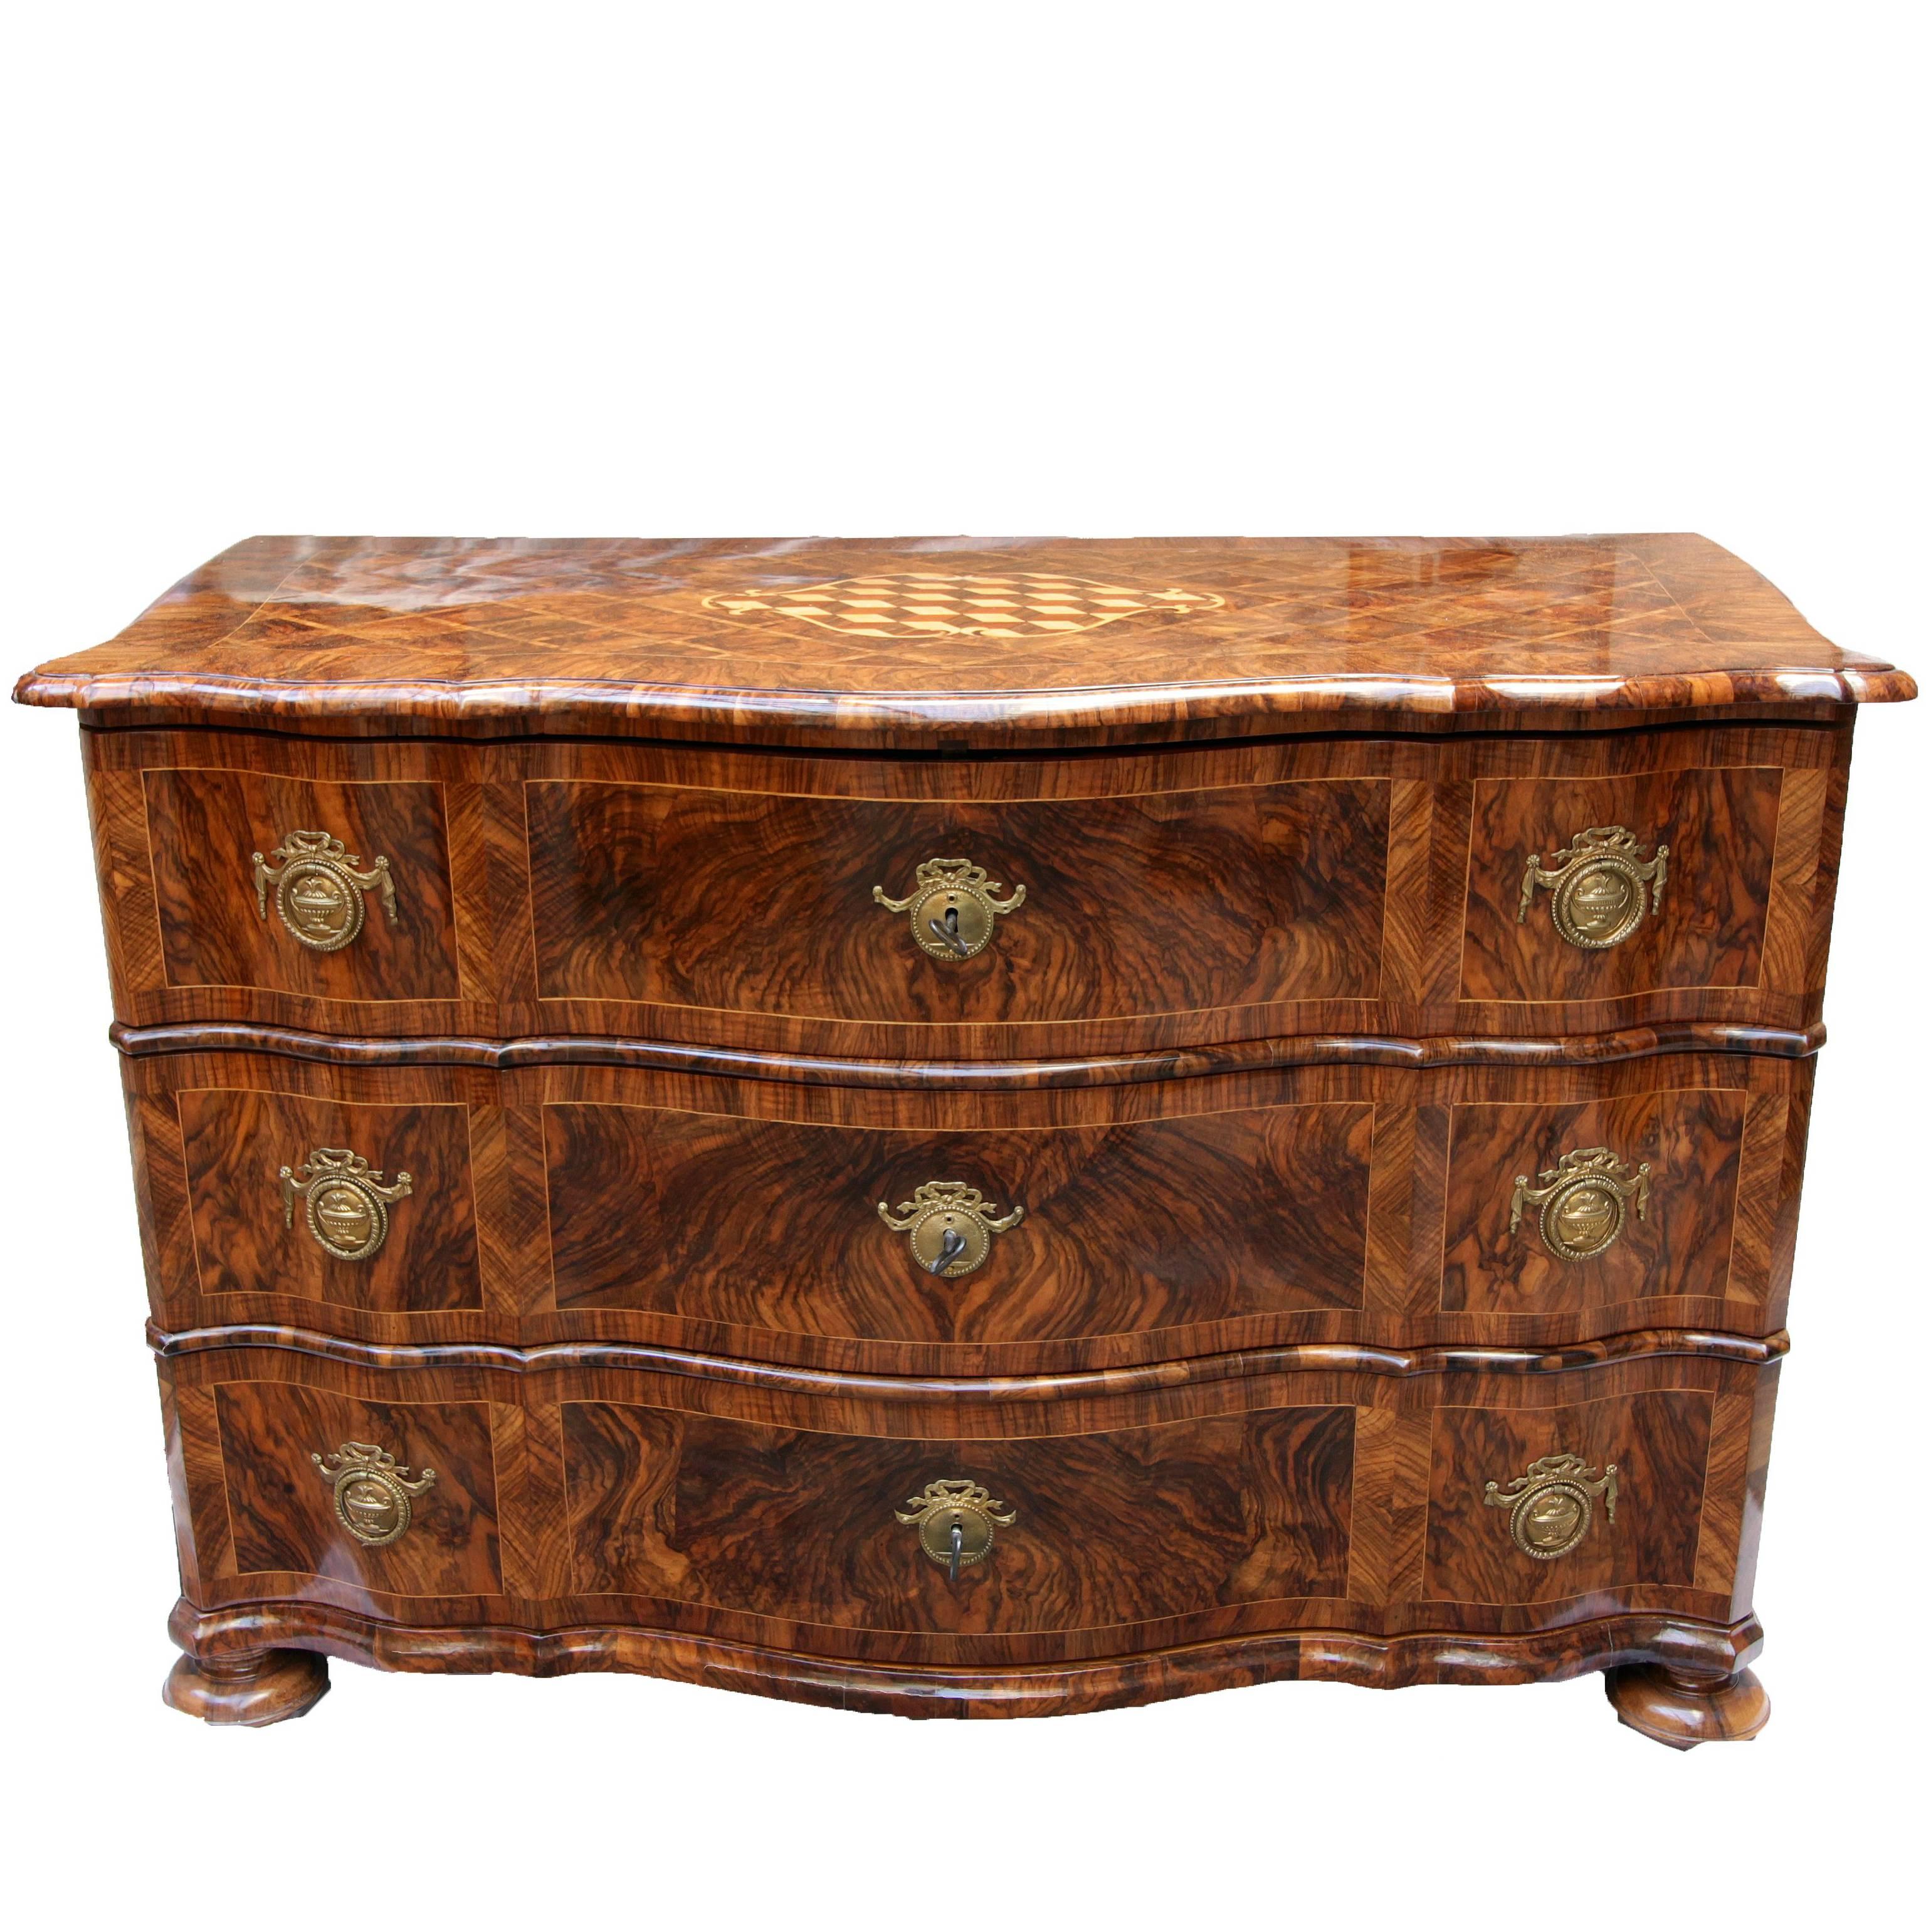 18th Century Baroque Chest of Drawers / Commode from Germany